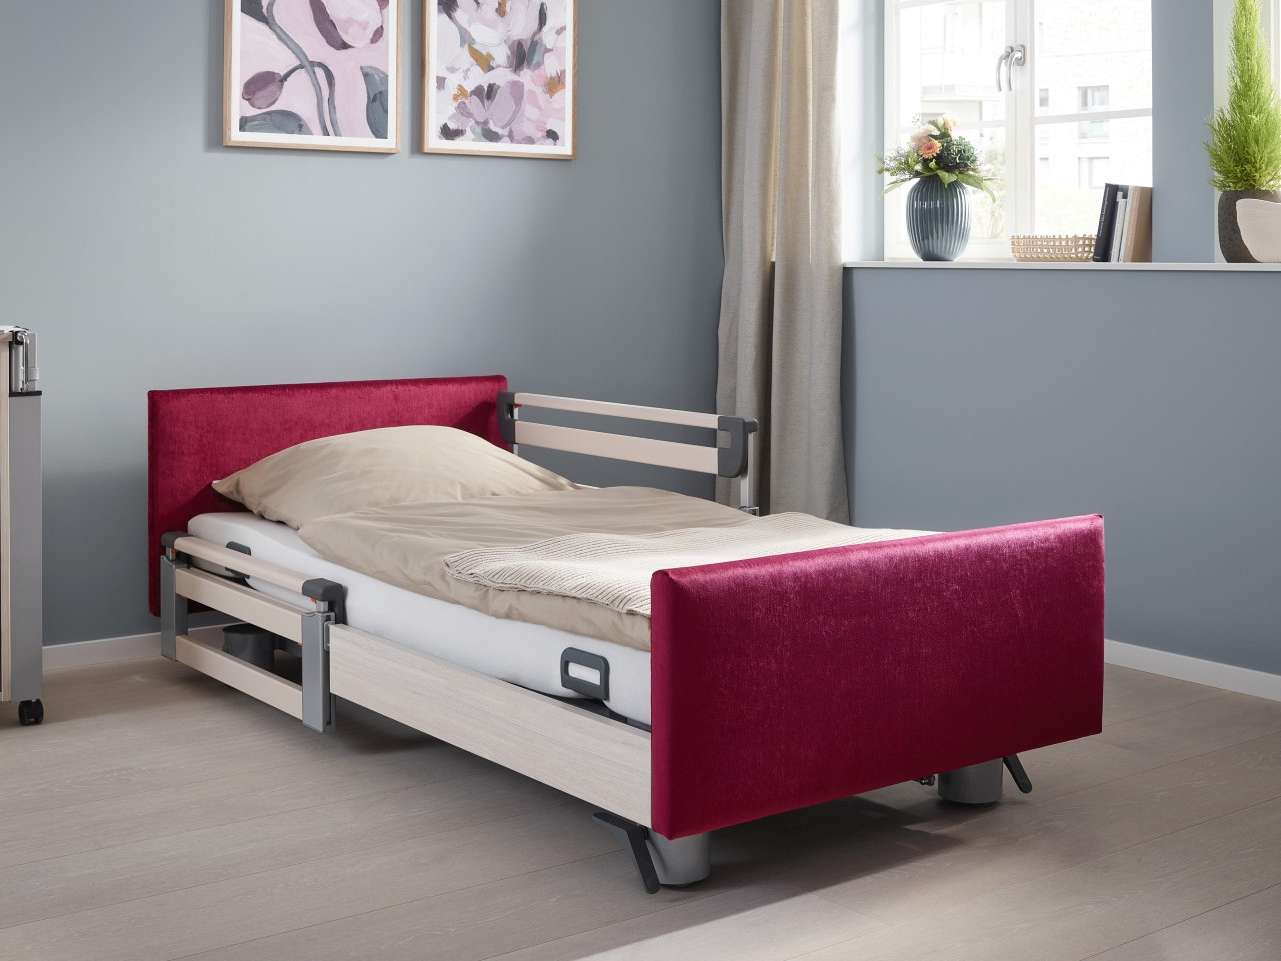 The Libra care bed from Stiegelmeyer with red fabric cover